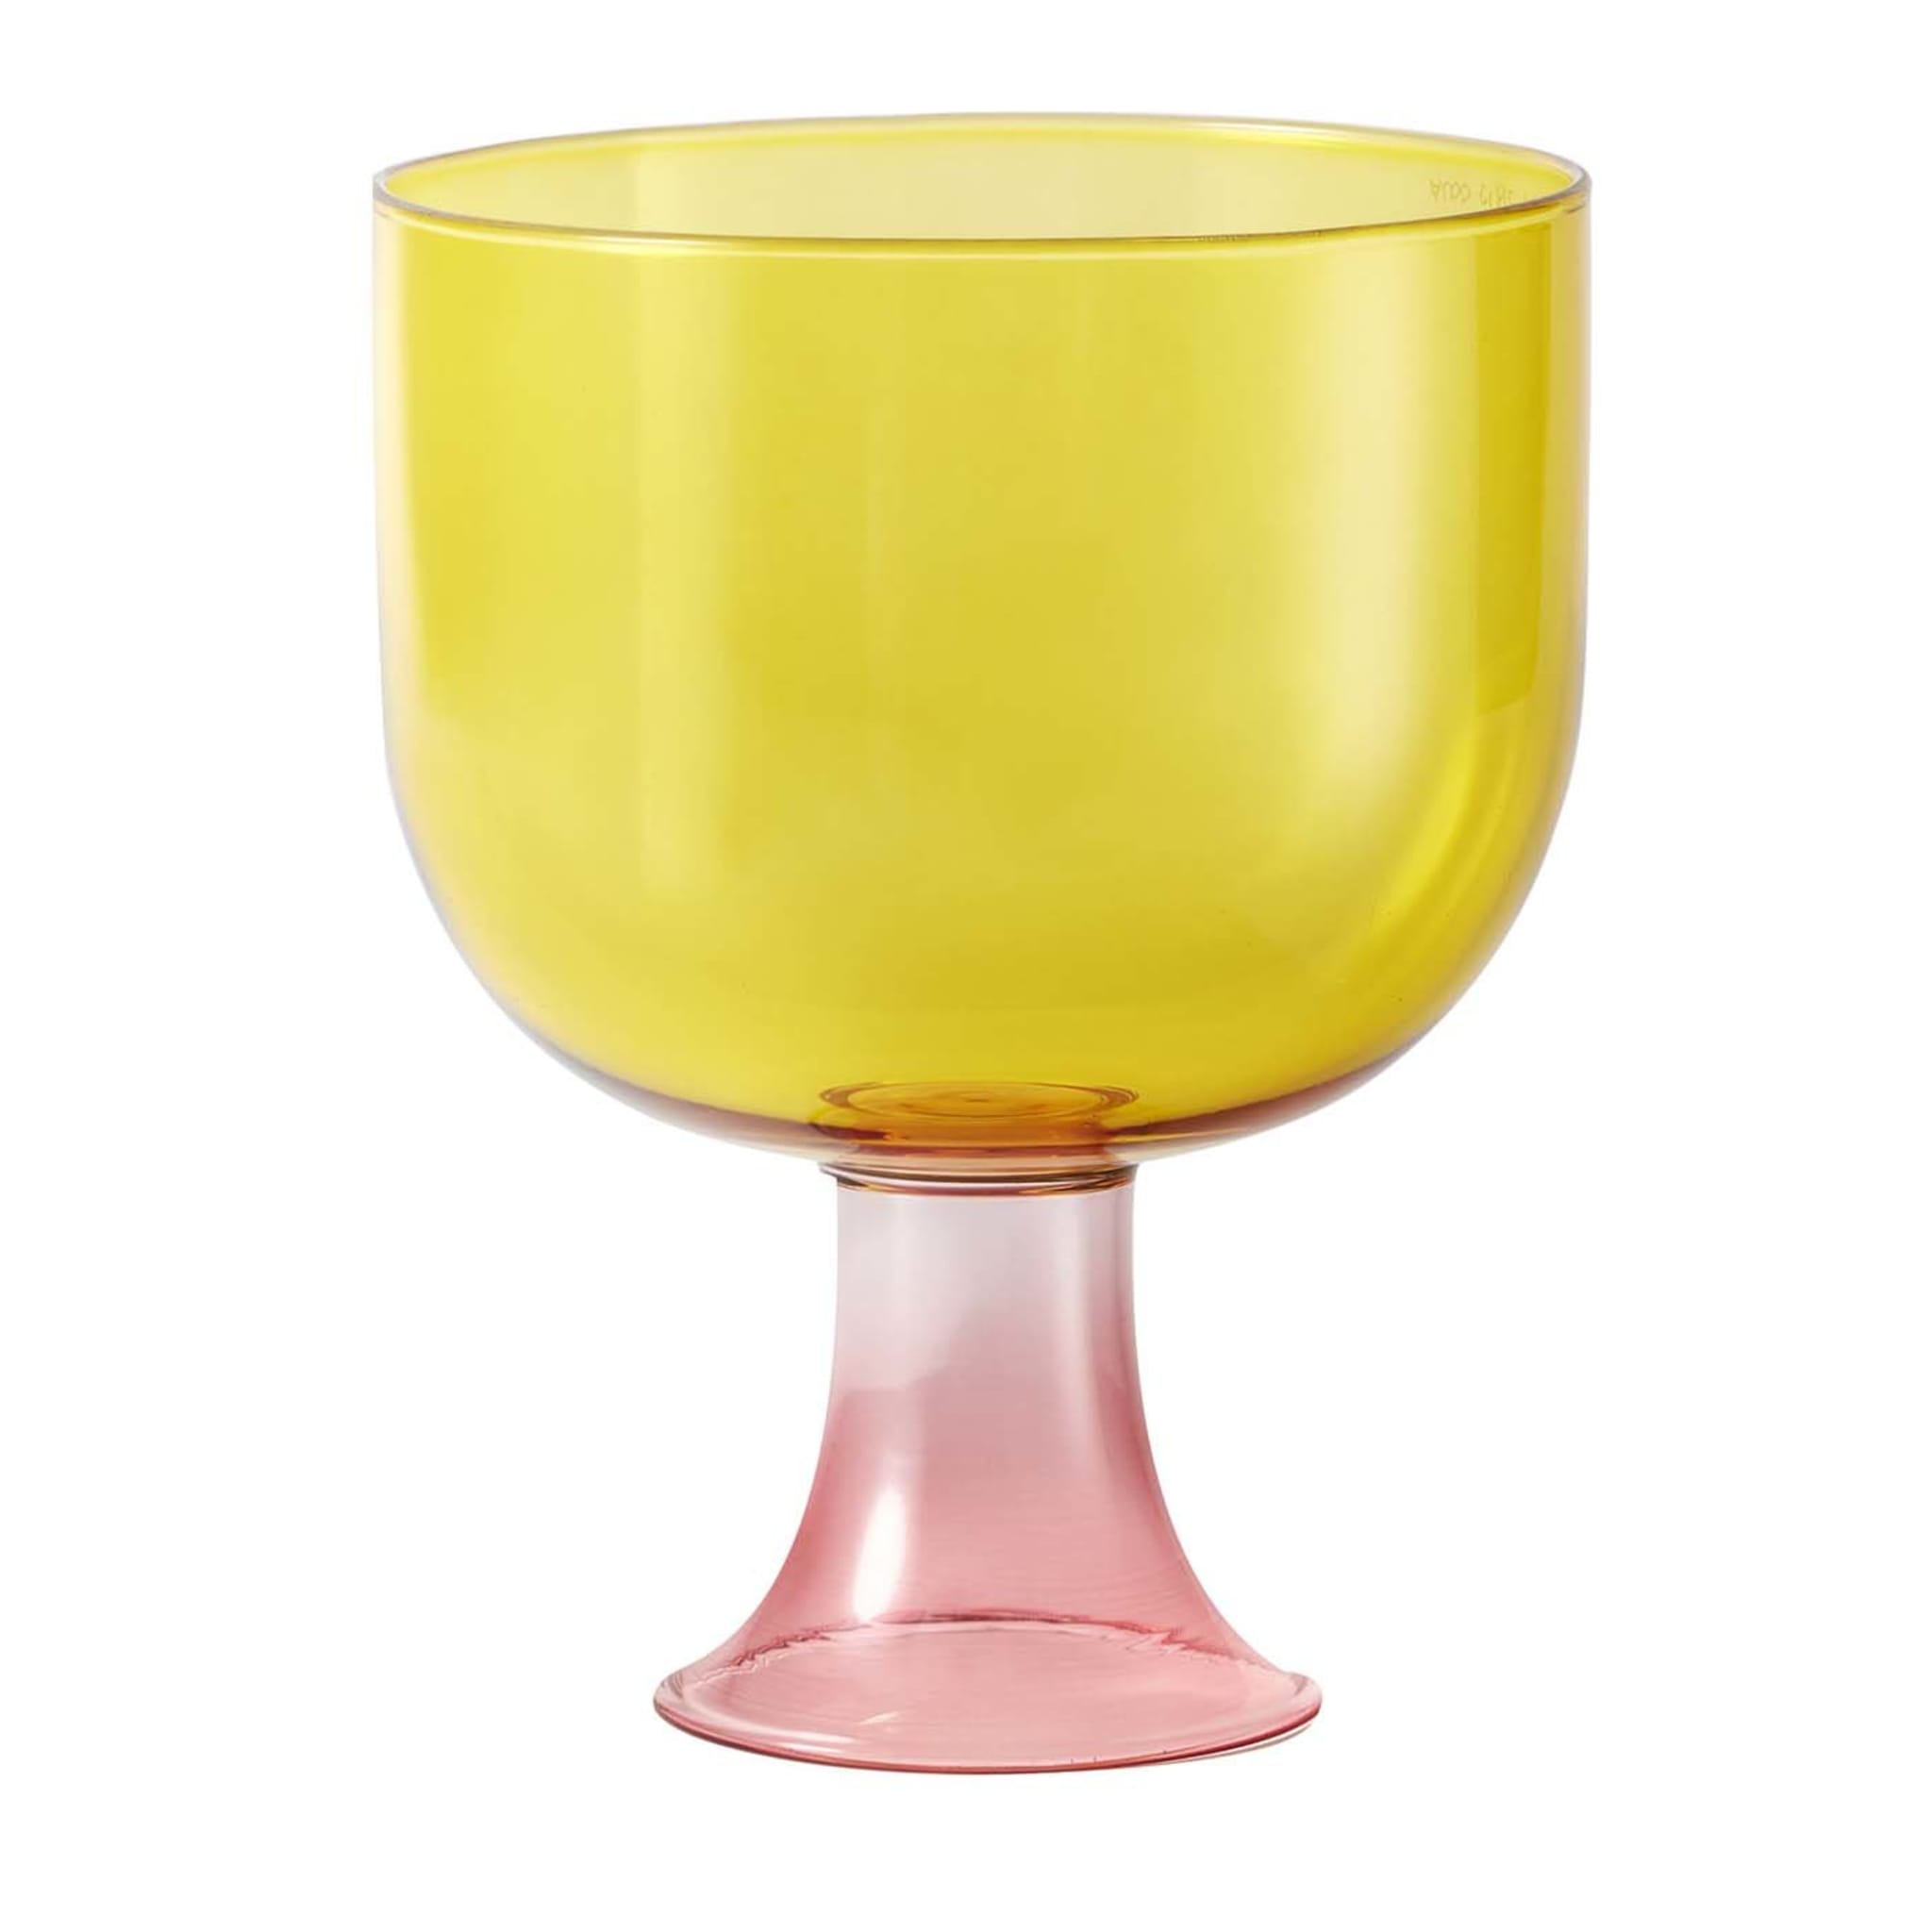 Cuppino Yellow and Pink Goblet by Aldo Cibic - Main view